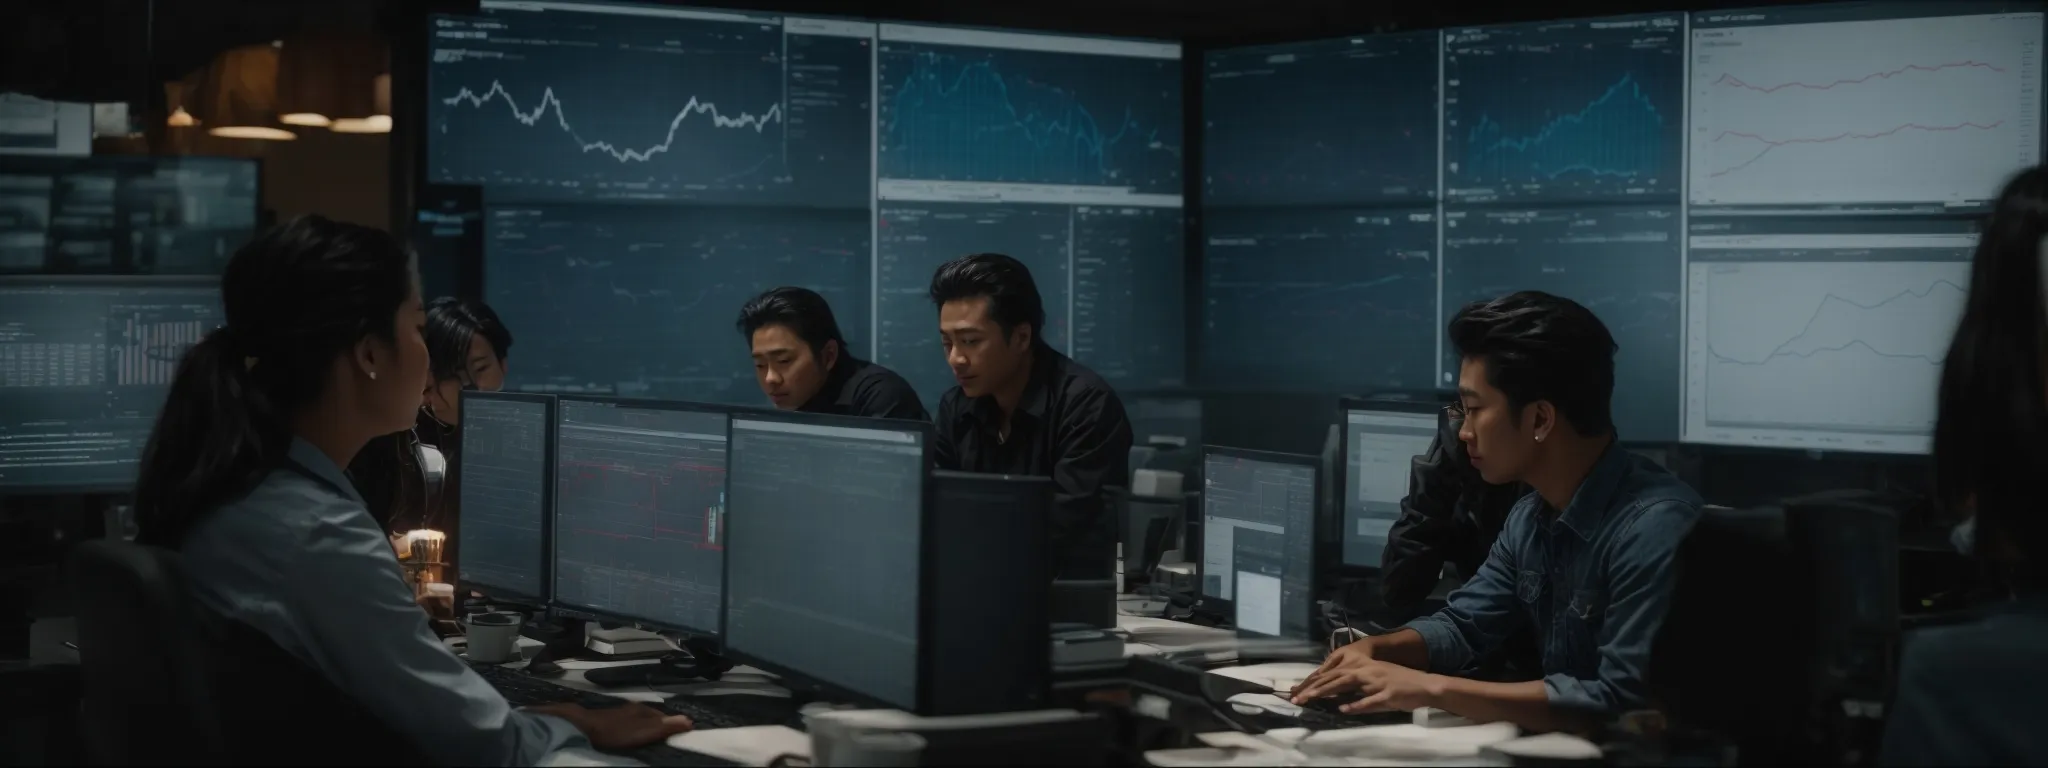 a group of professionals collaboratively examines data charts on a large monitor, analyzing seo performance metrics.